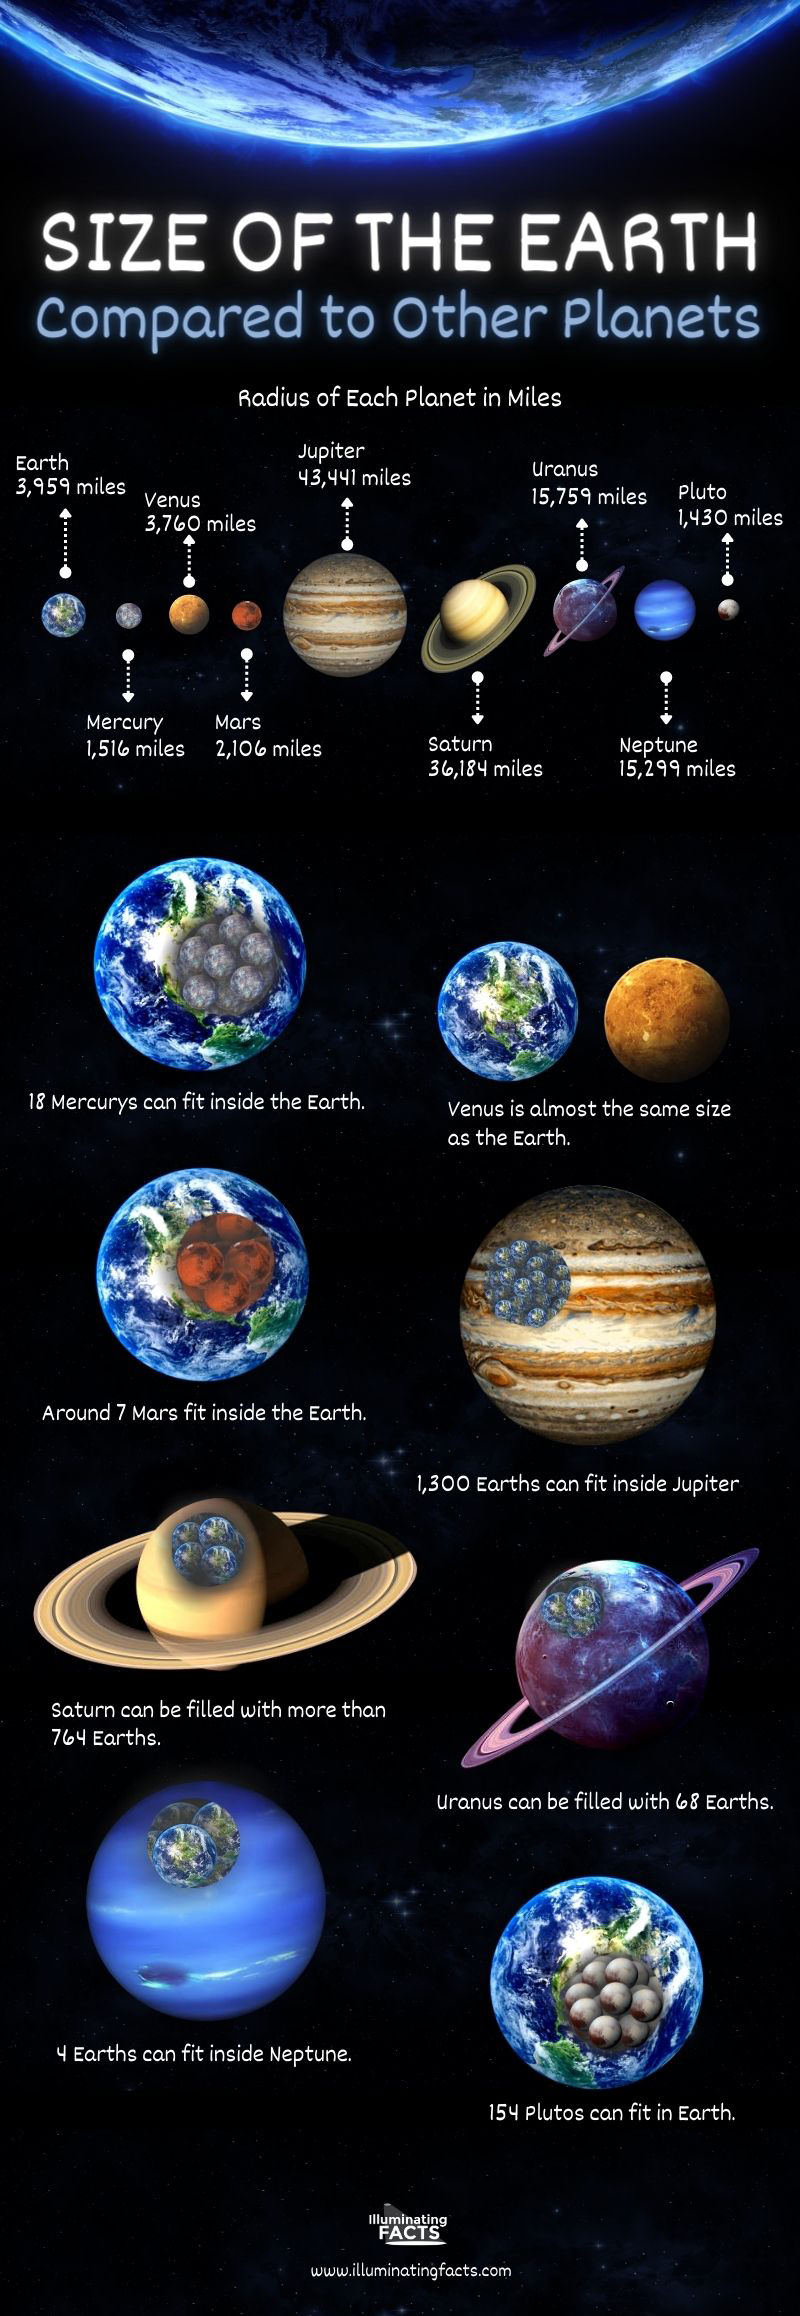 Size of the Earth Compared to Other Planets